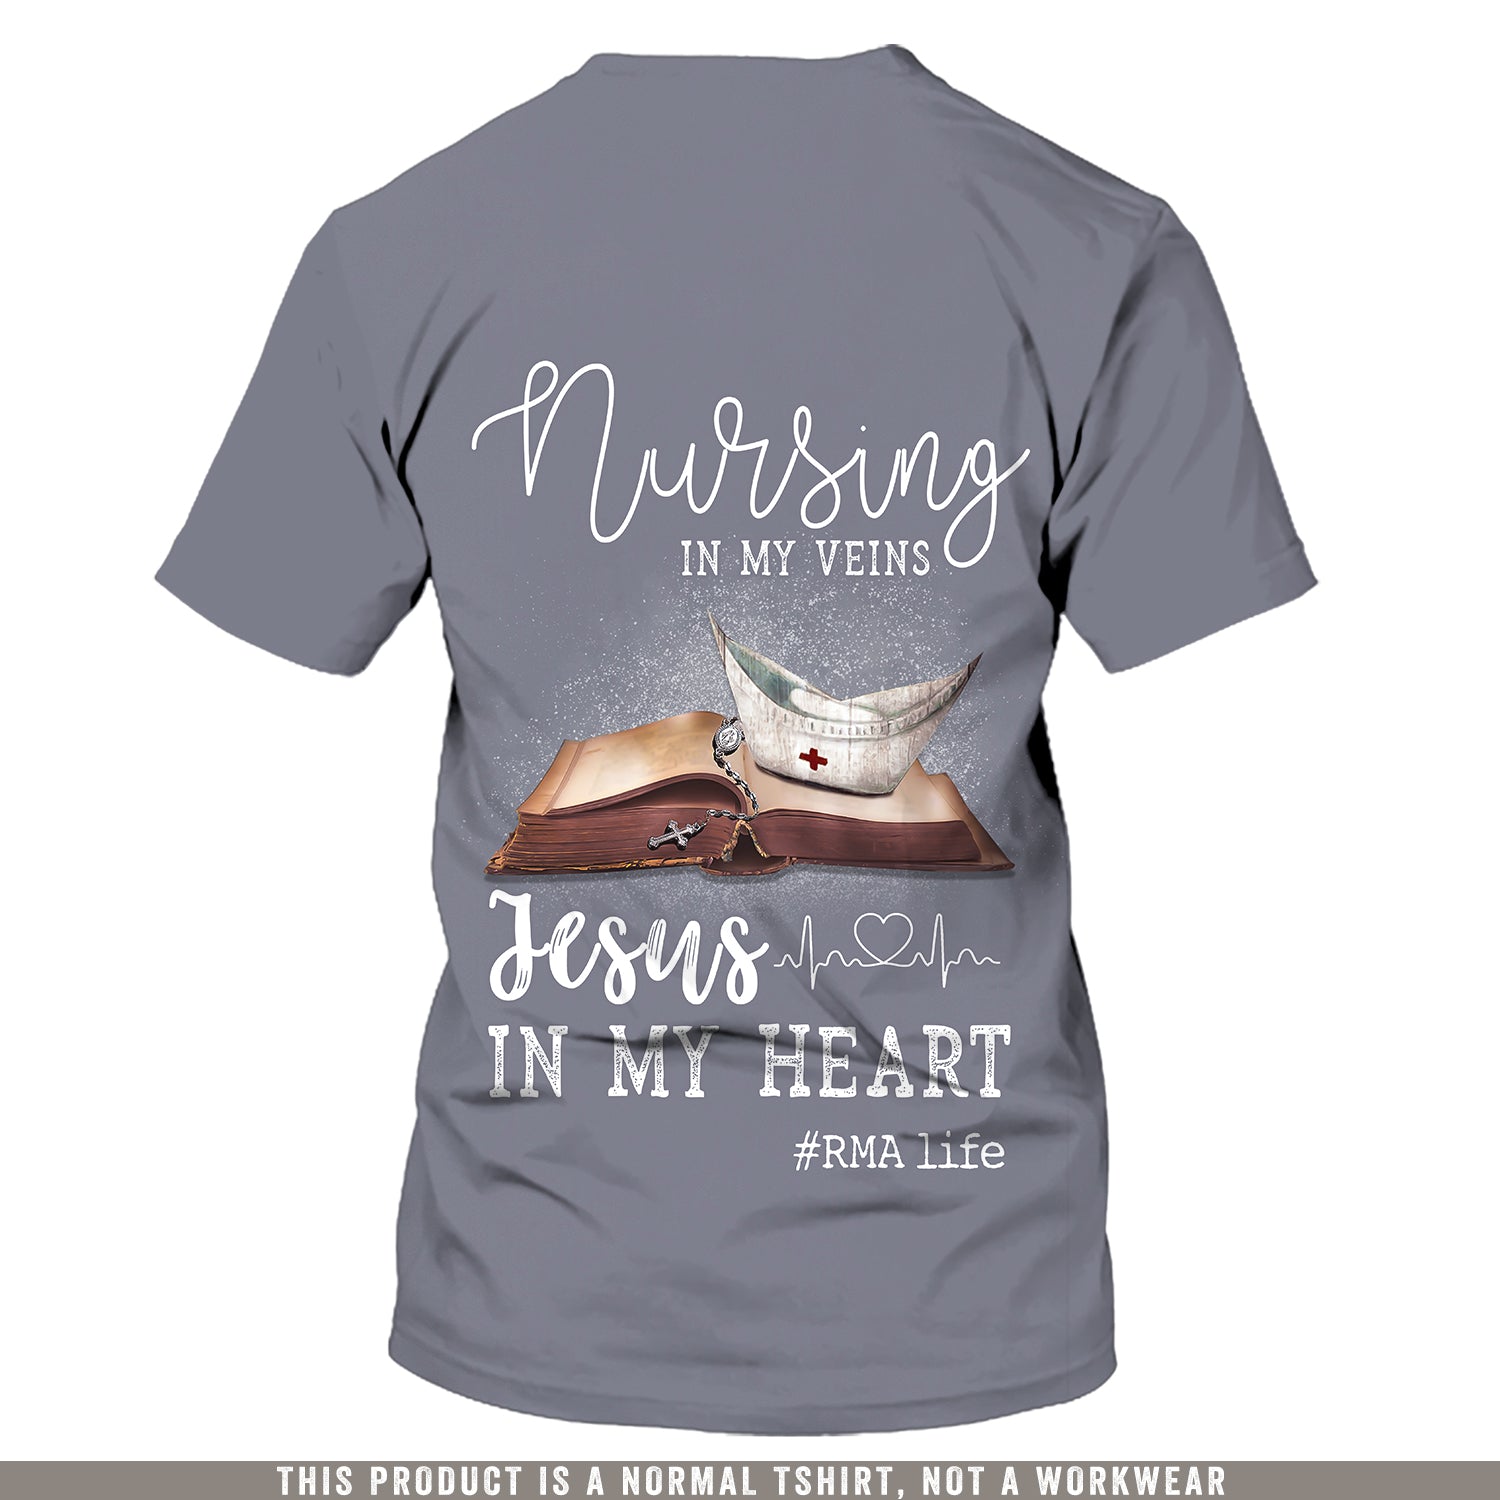 #RMALife, Nursing In My Veins Jesus In My Heart Personalized Name 3D Tshirt [Non workwear]